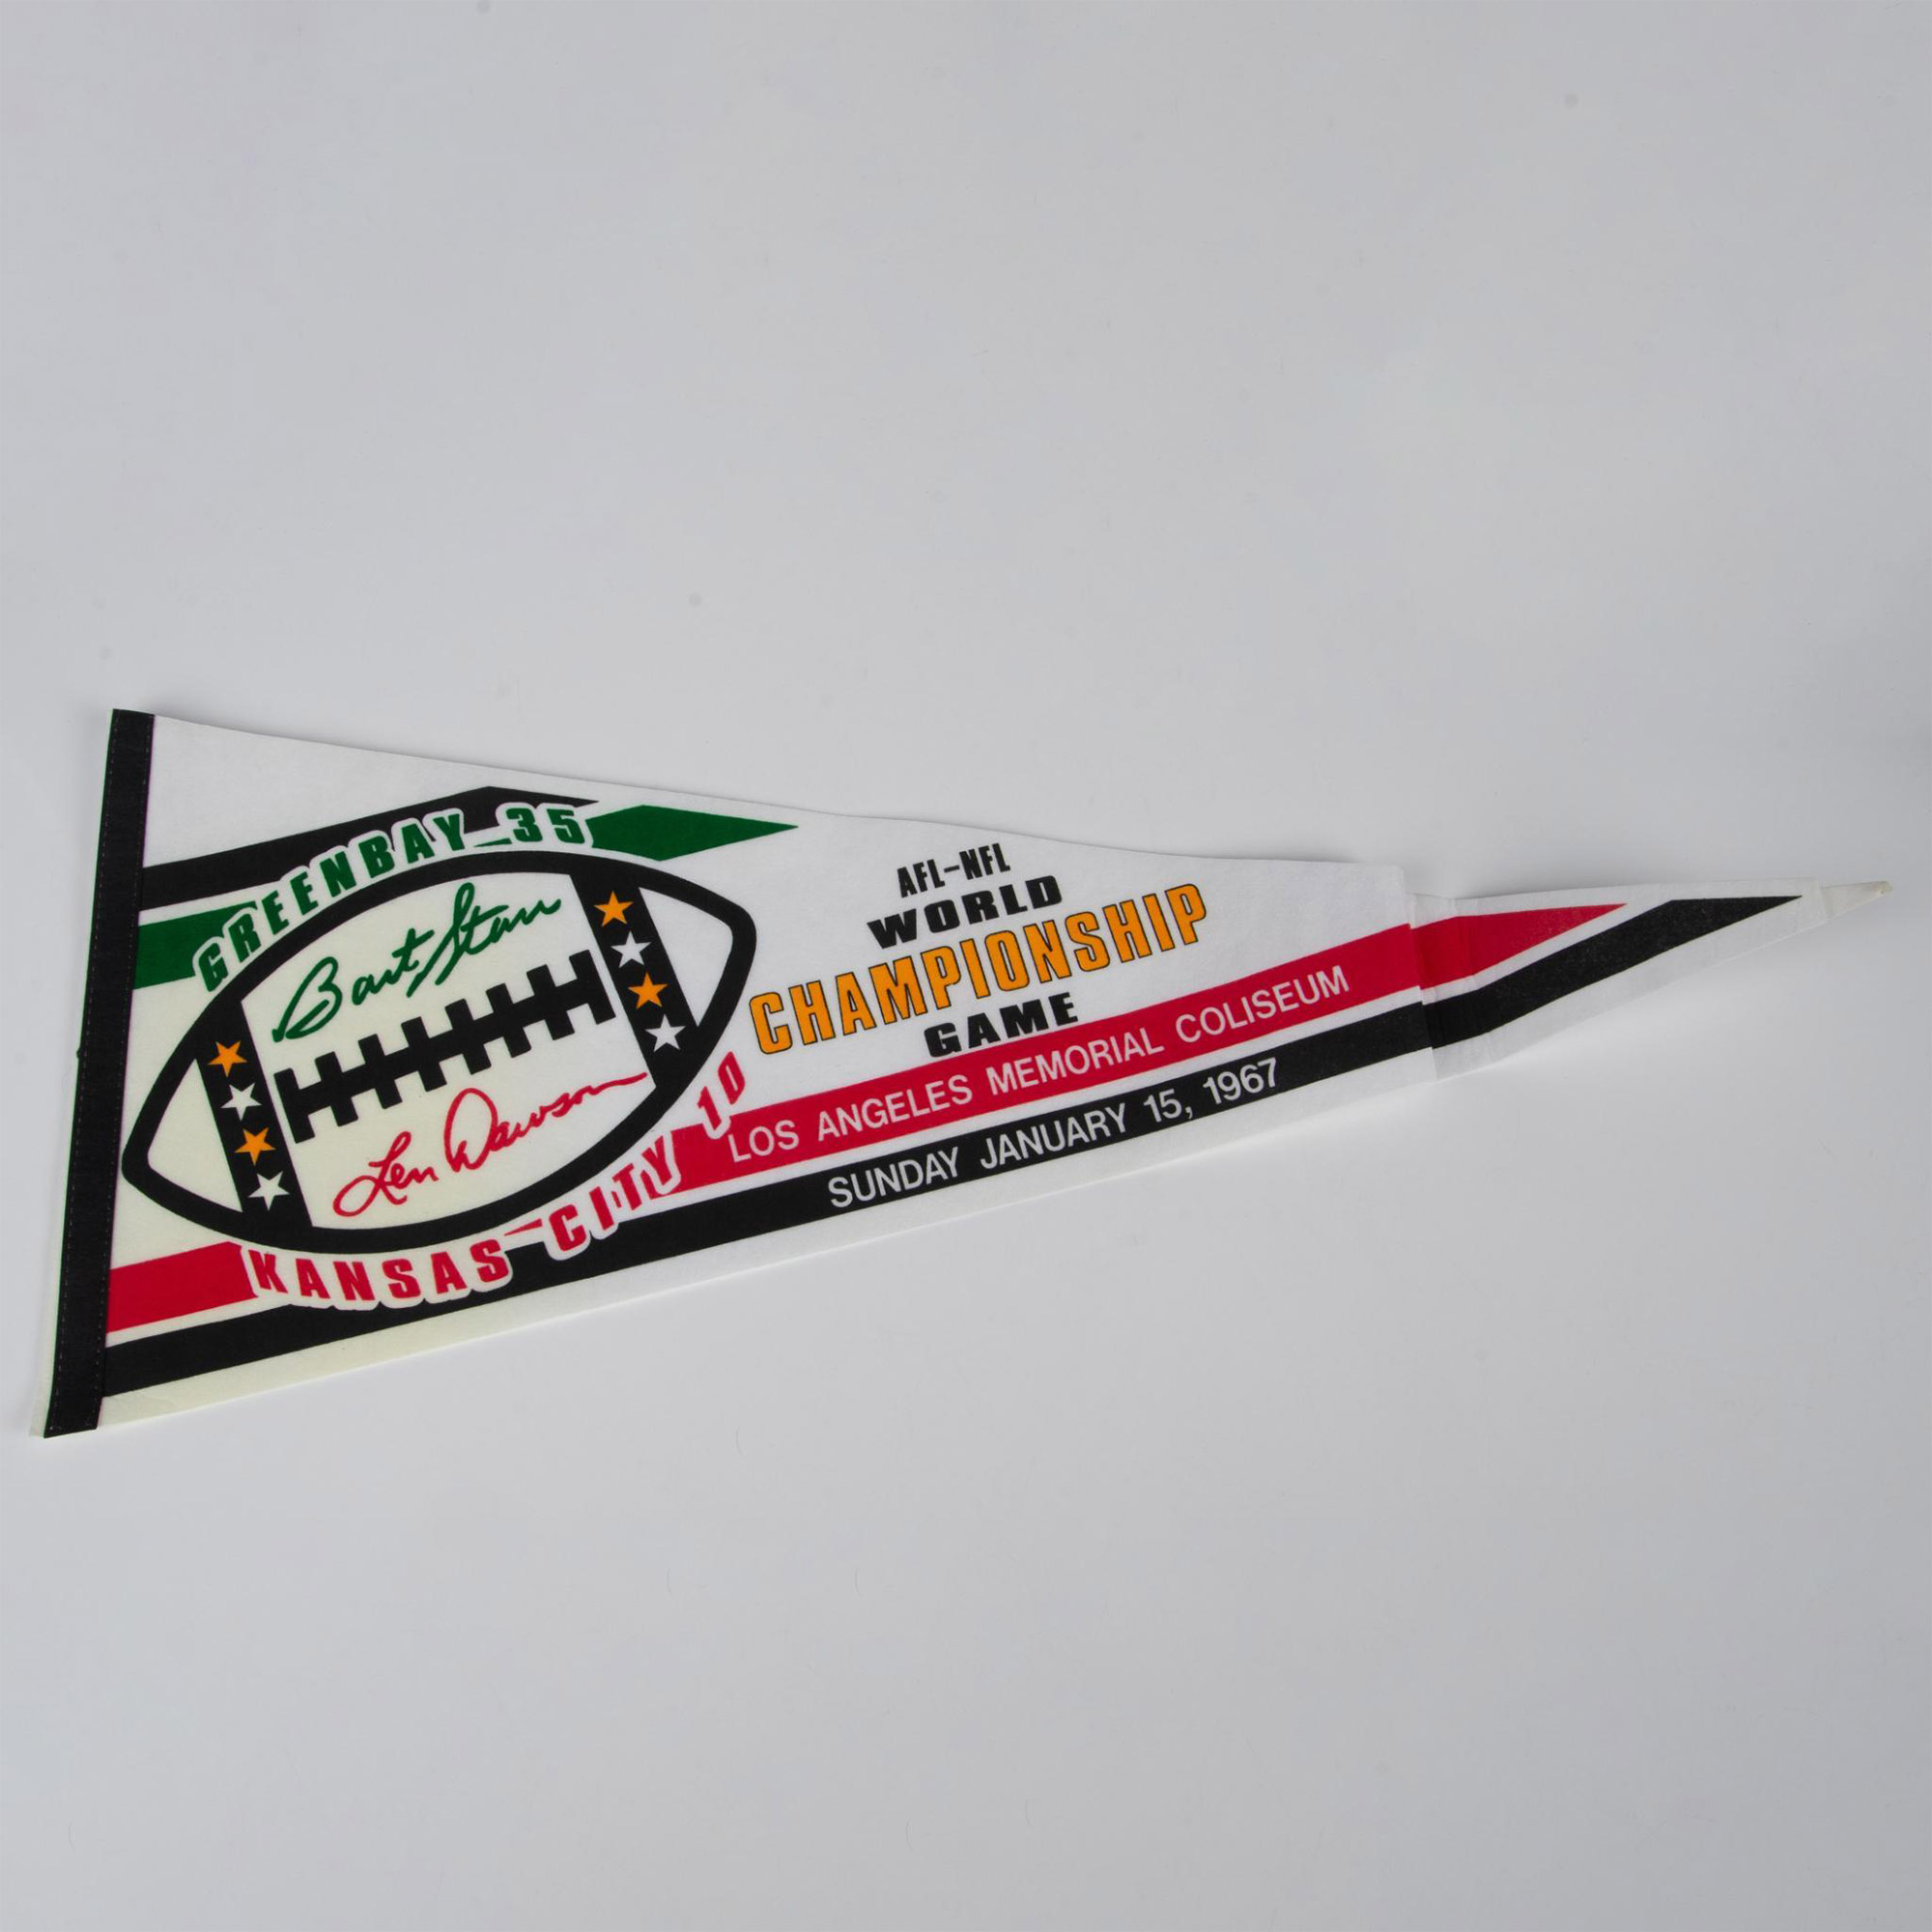 3pc Green Bay Packers and Raiders Football Mini Flags - Image 3 of 3